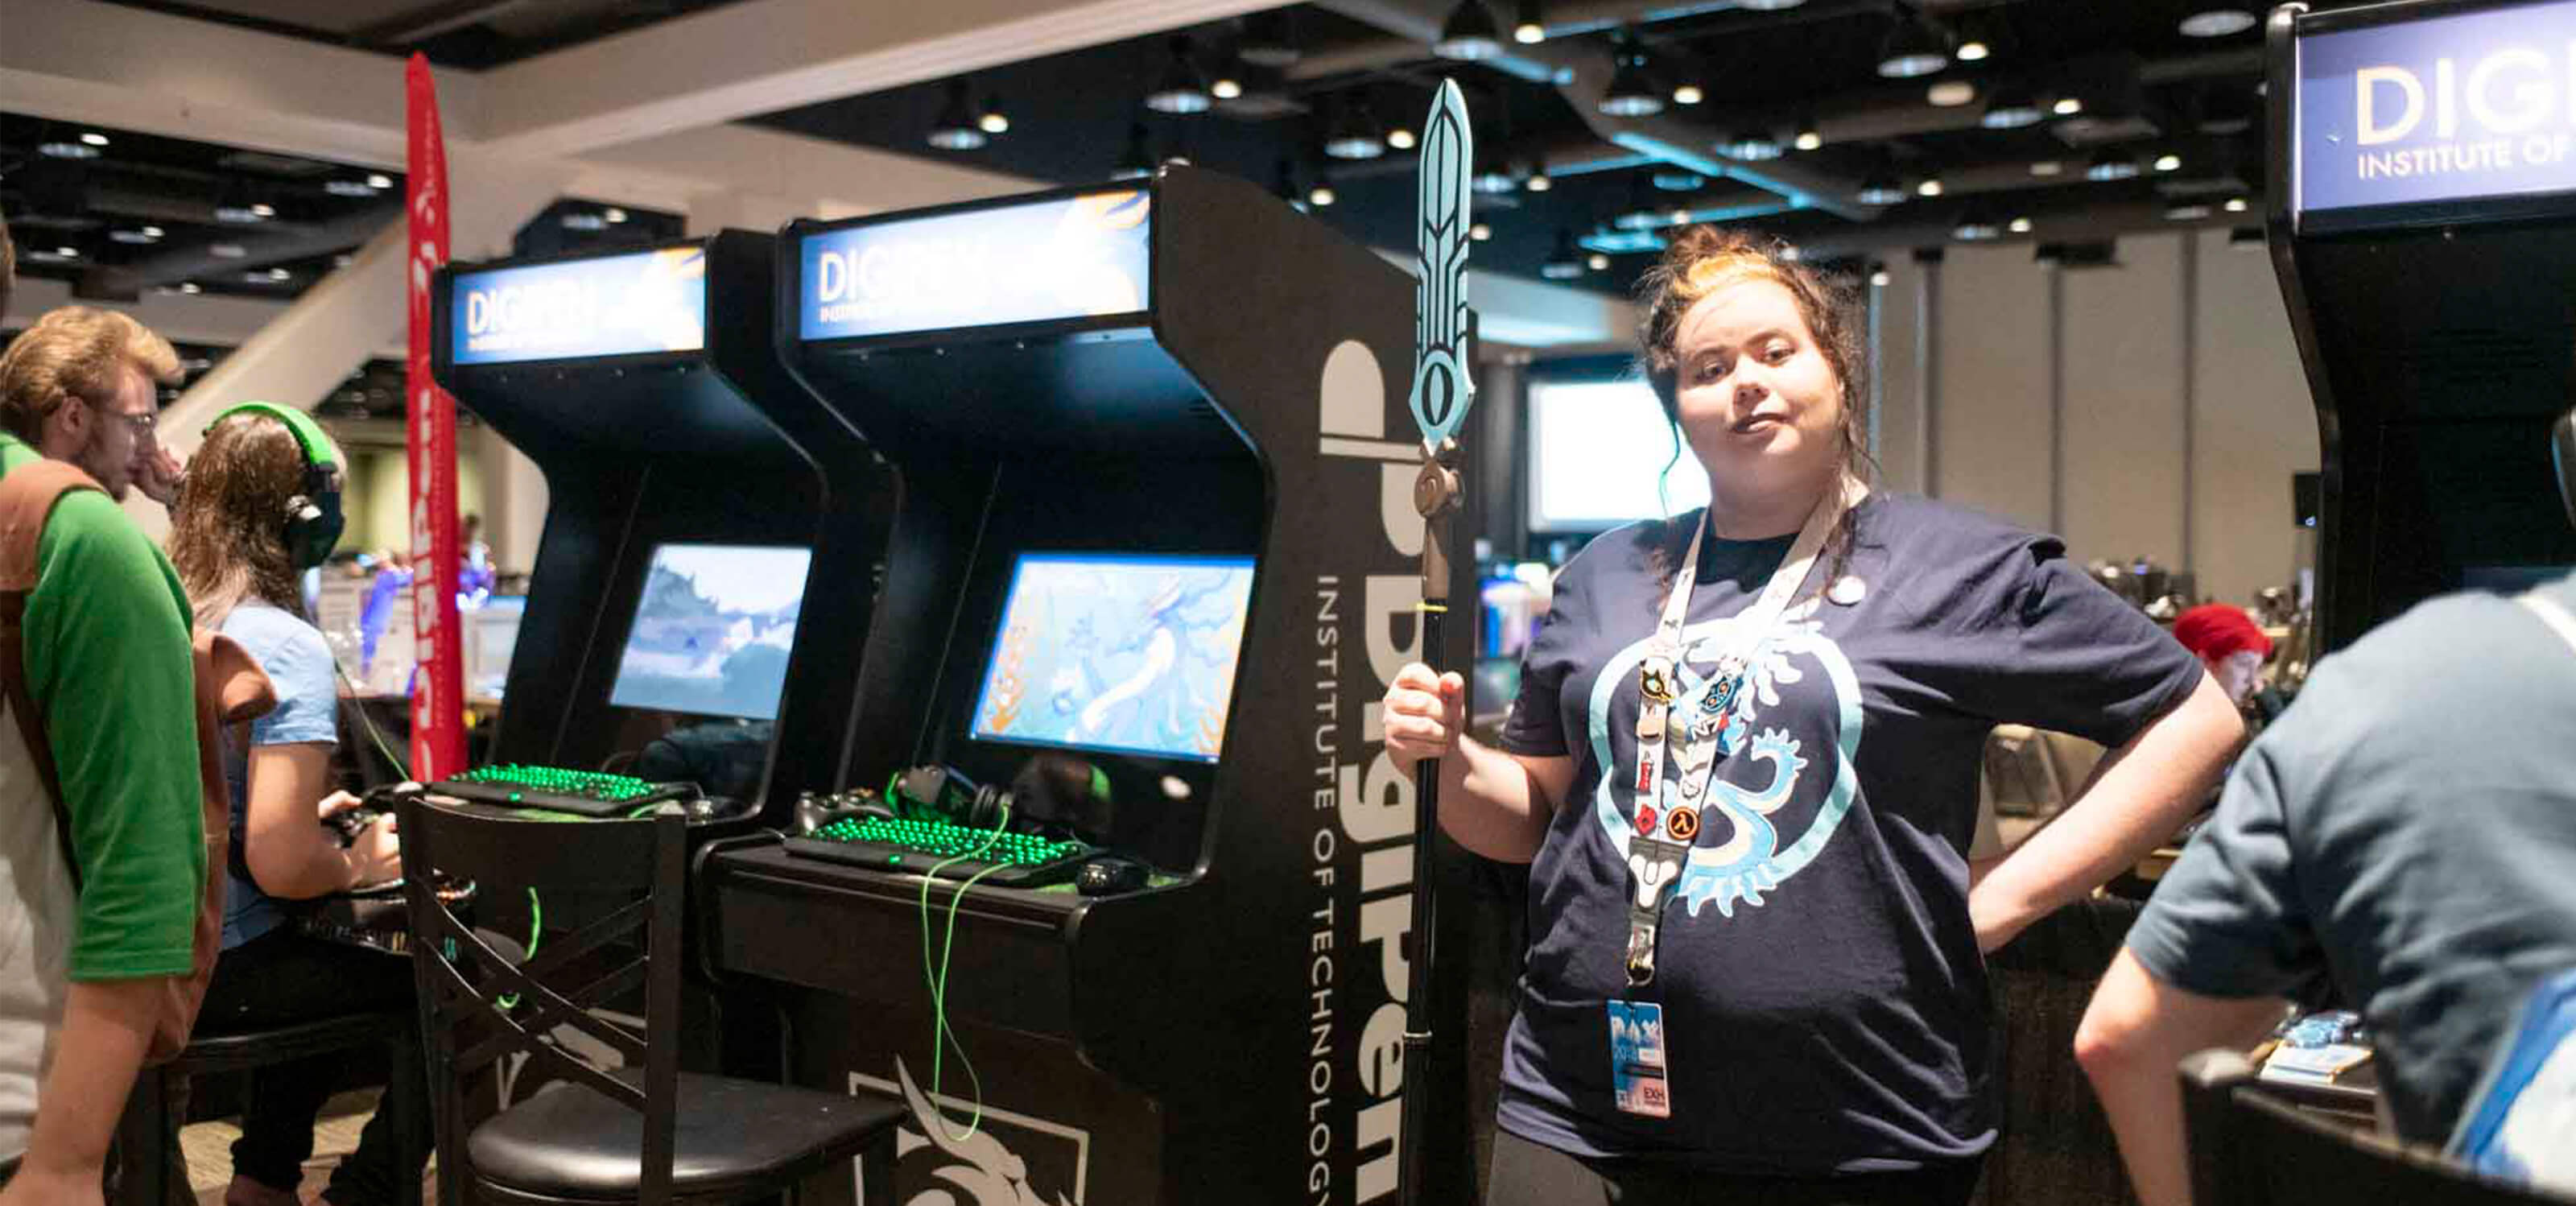 A DigiPen student staffs the PAX DigiPen arcade, cosplay spear in hand.